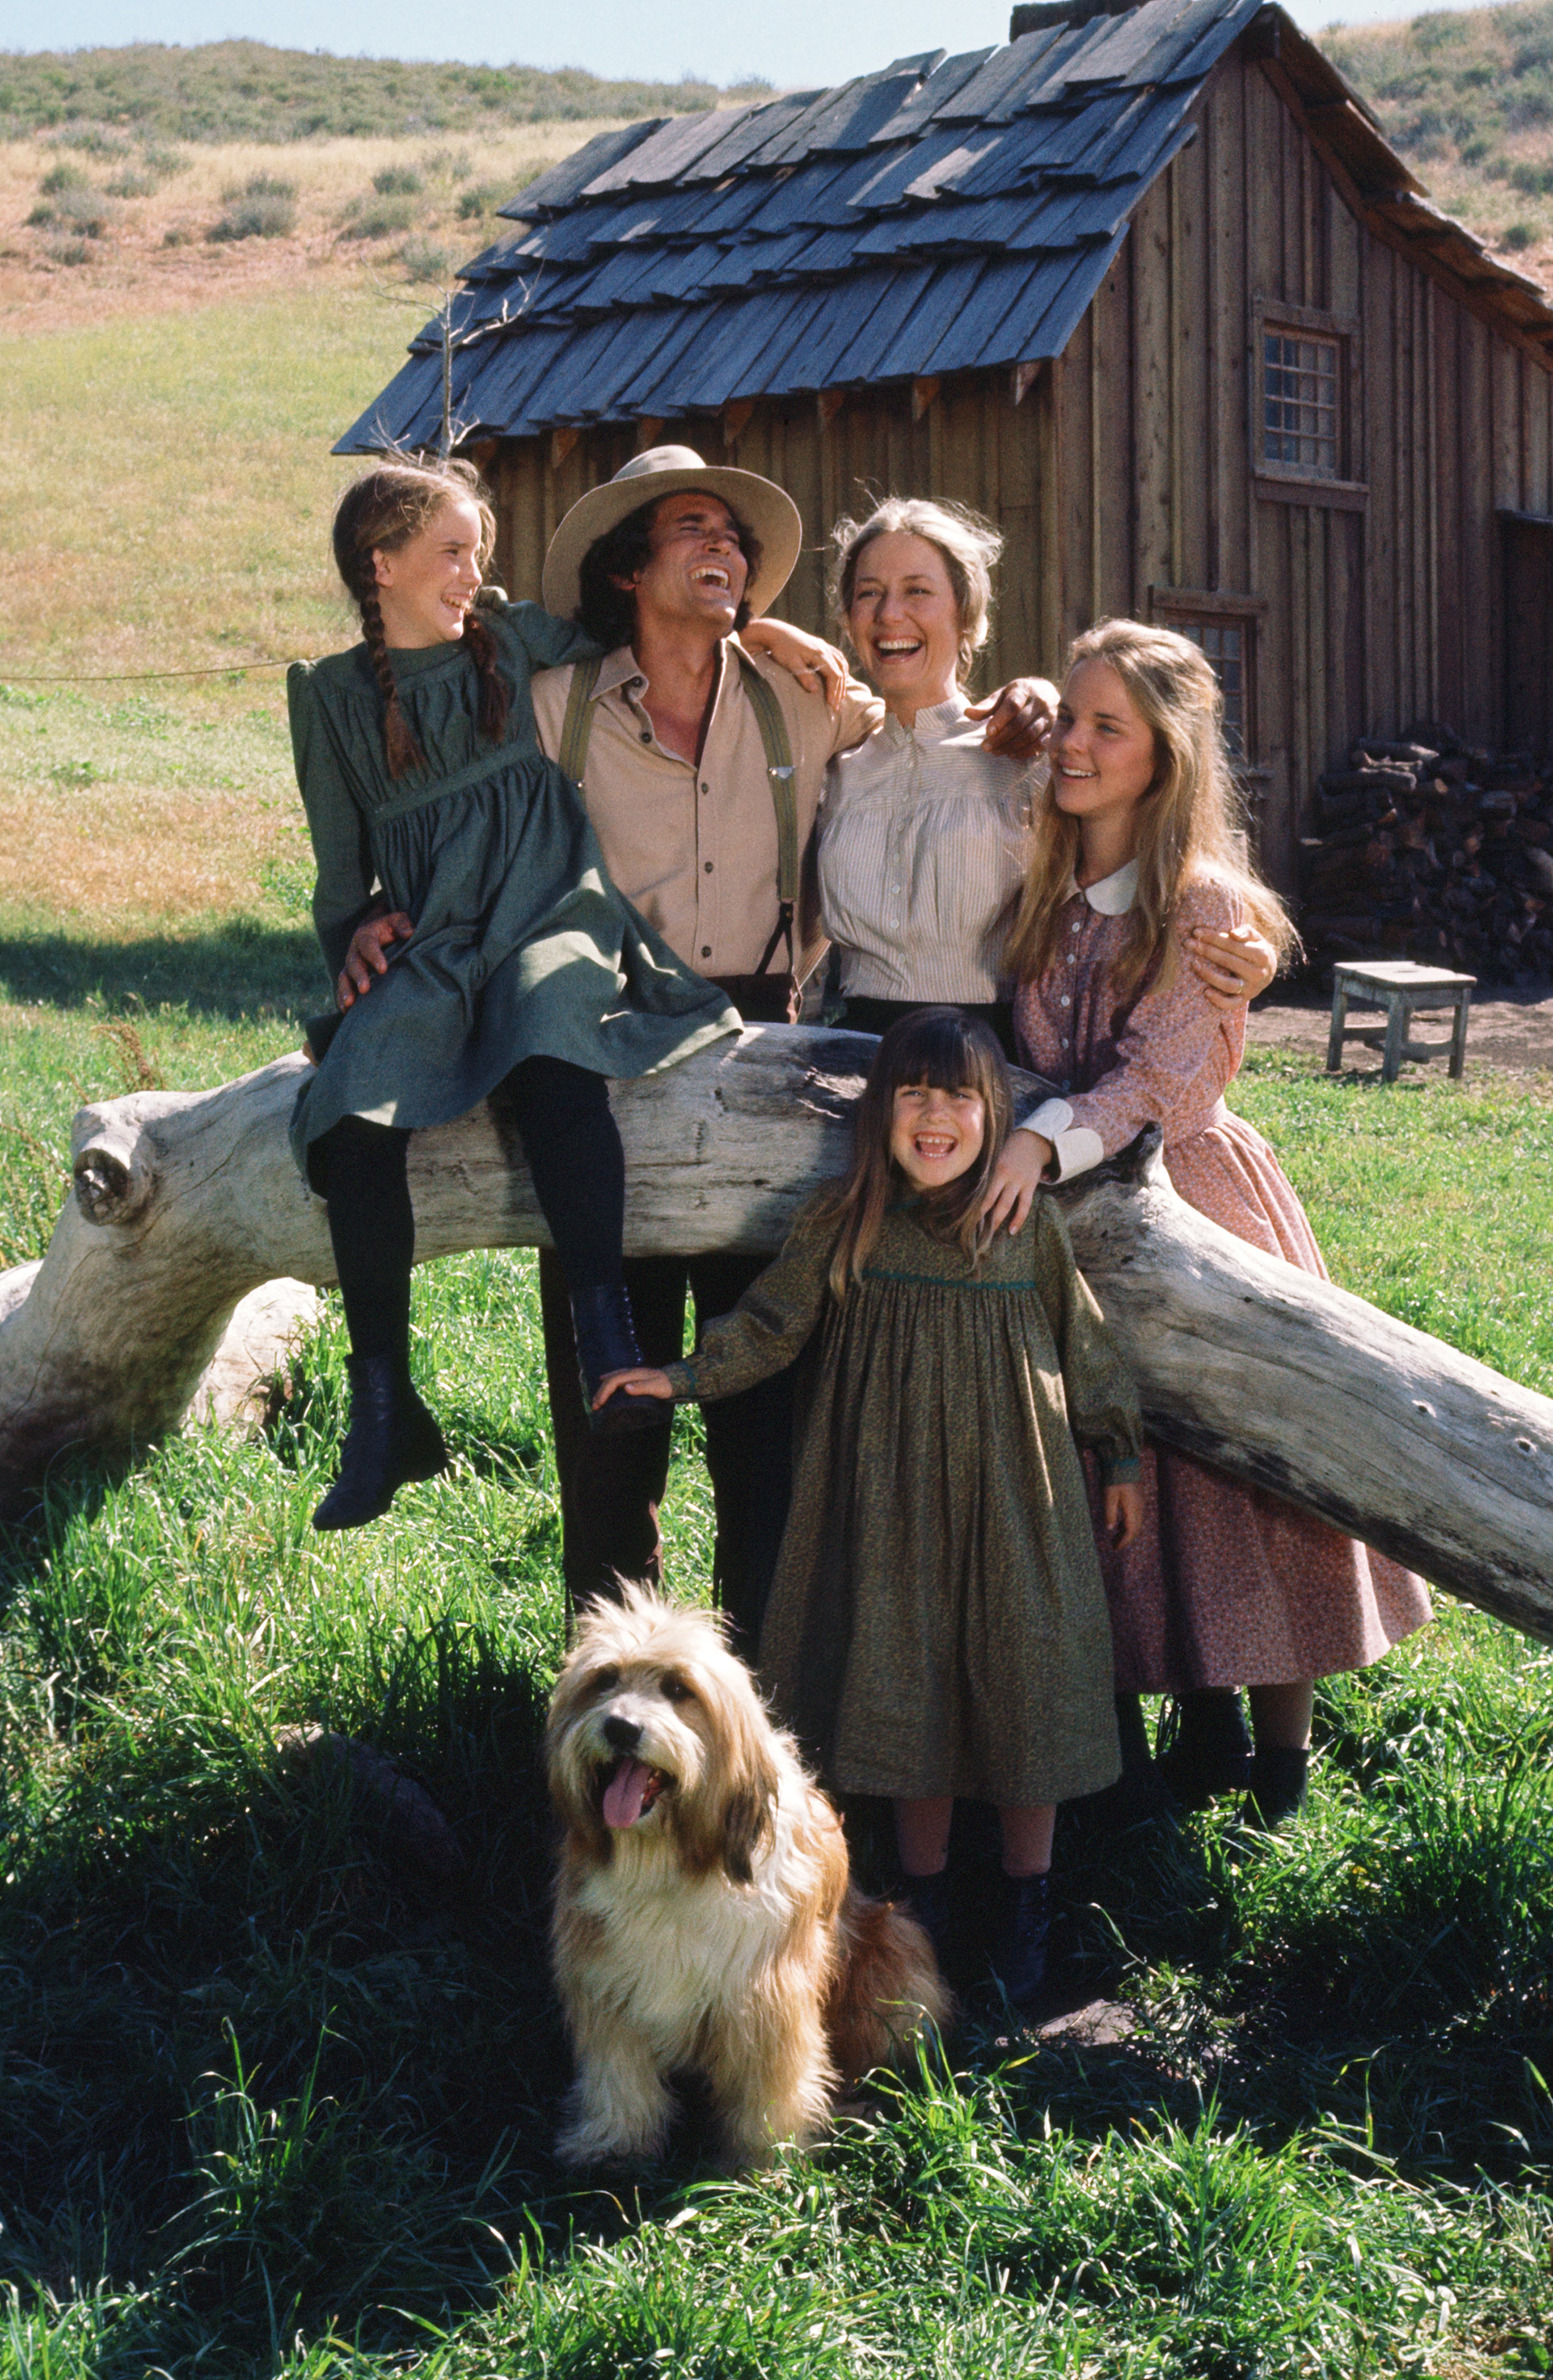 Melissa Gilbert, Michael Landon, Karen Grassle, Melissa Sue Anderson, and Lindsay or Sydney Greenbush on season 3 of "Little House on the Prairie" in an undated photo | Source: Getty Images